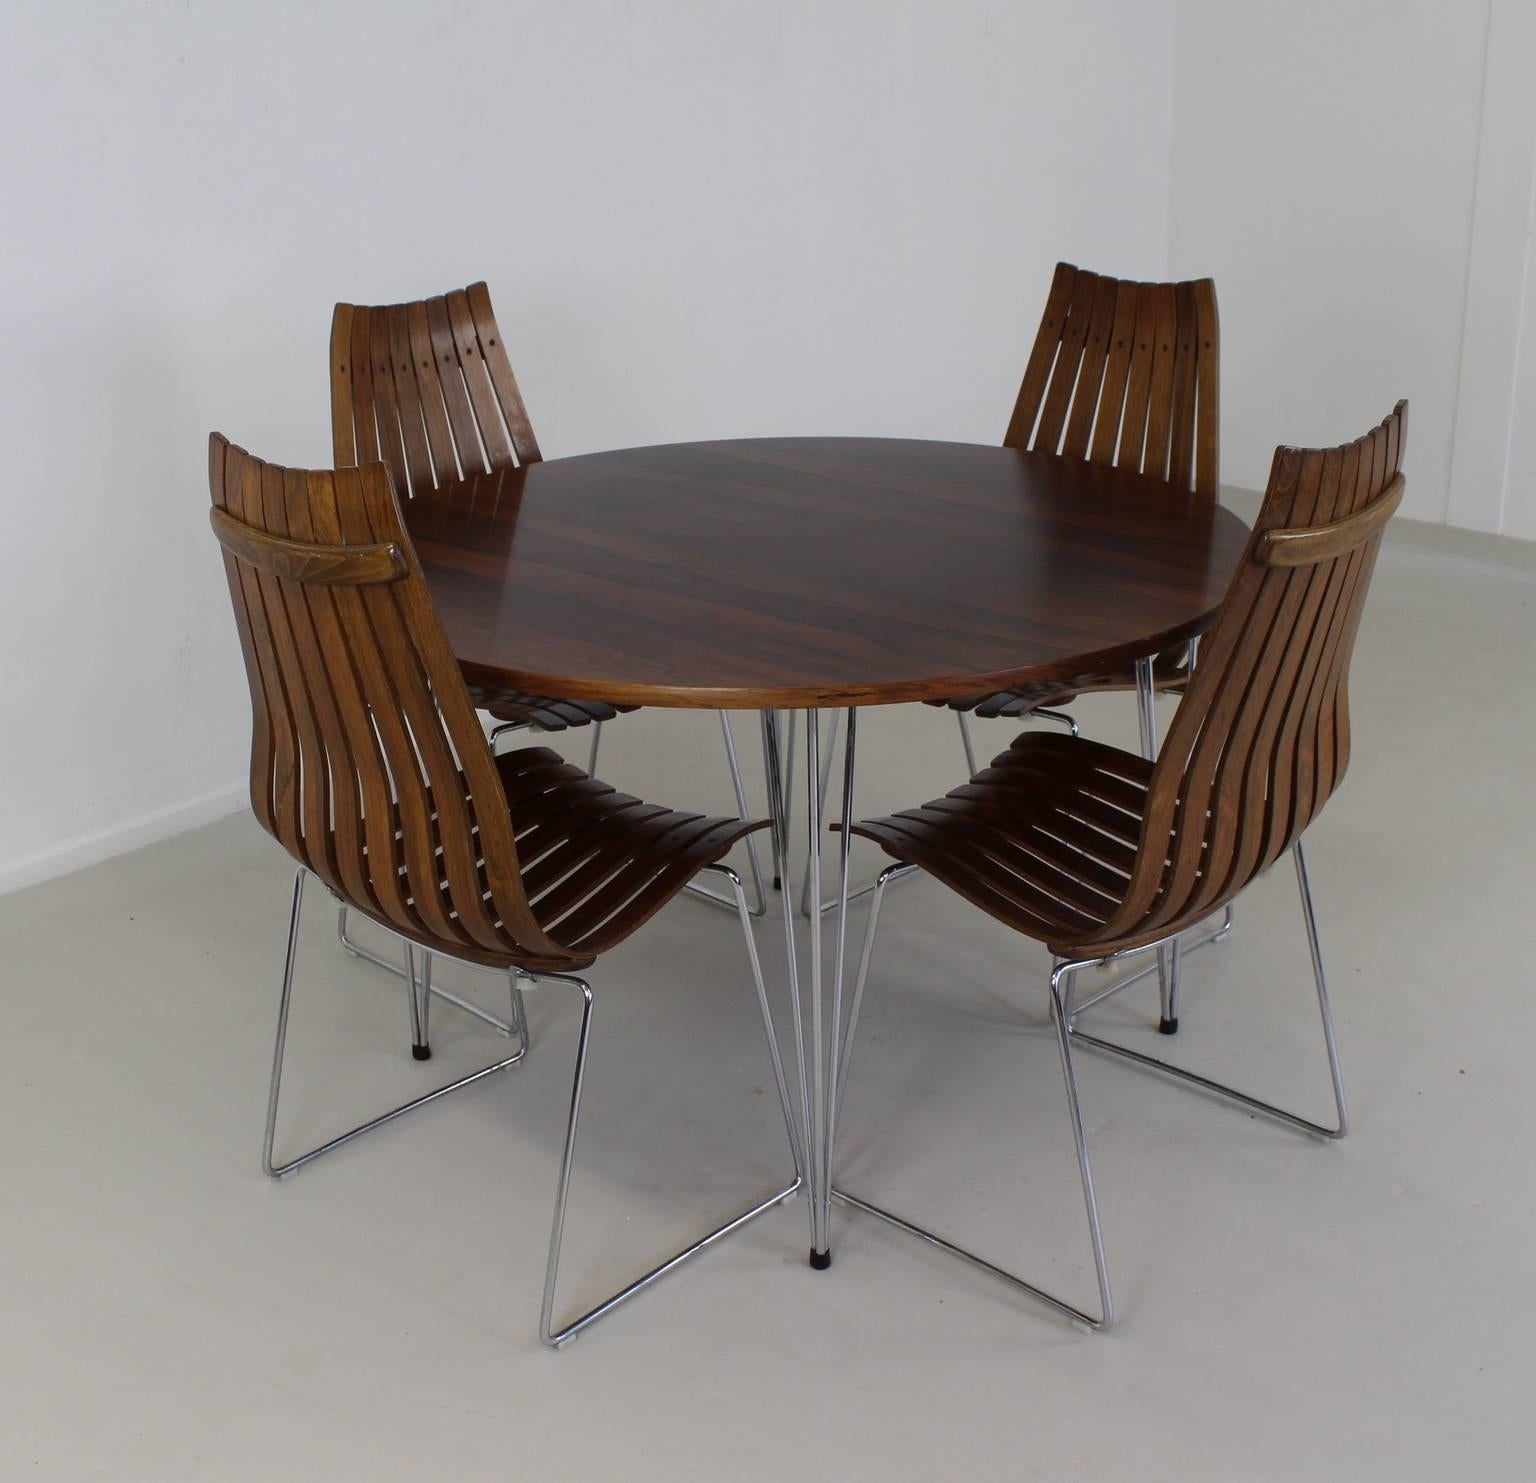 Exclusive dinner set with stackable dinner chairs.
Designer: Hans Brattrud in 1957.
Manufacturer: Hove Mobler Norway.
Chair model: Scandia.
Table also in rosewood and chromed legs.
Diameter: 115 cm.
Height: 72 cm.
      